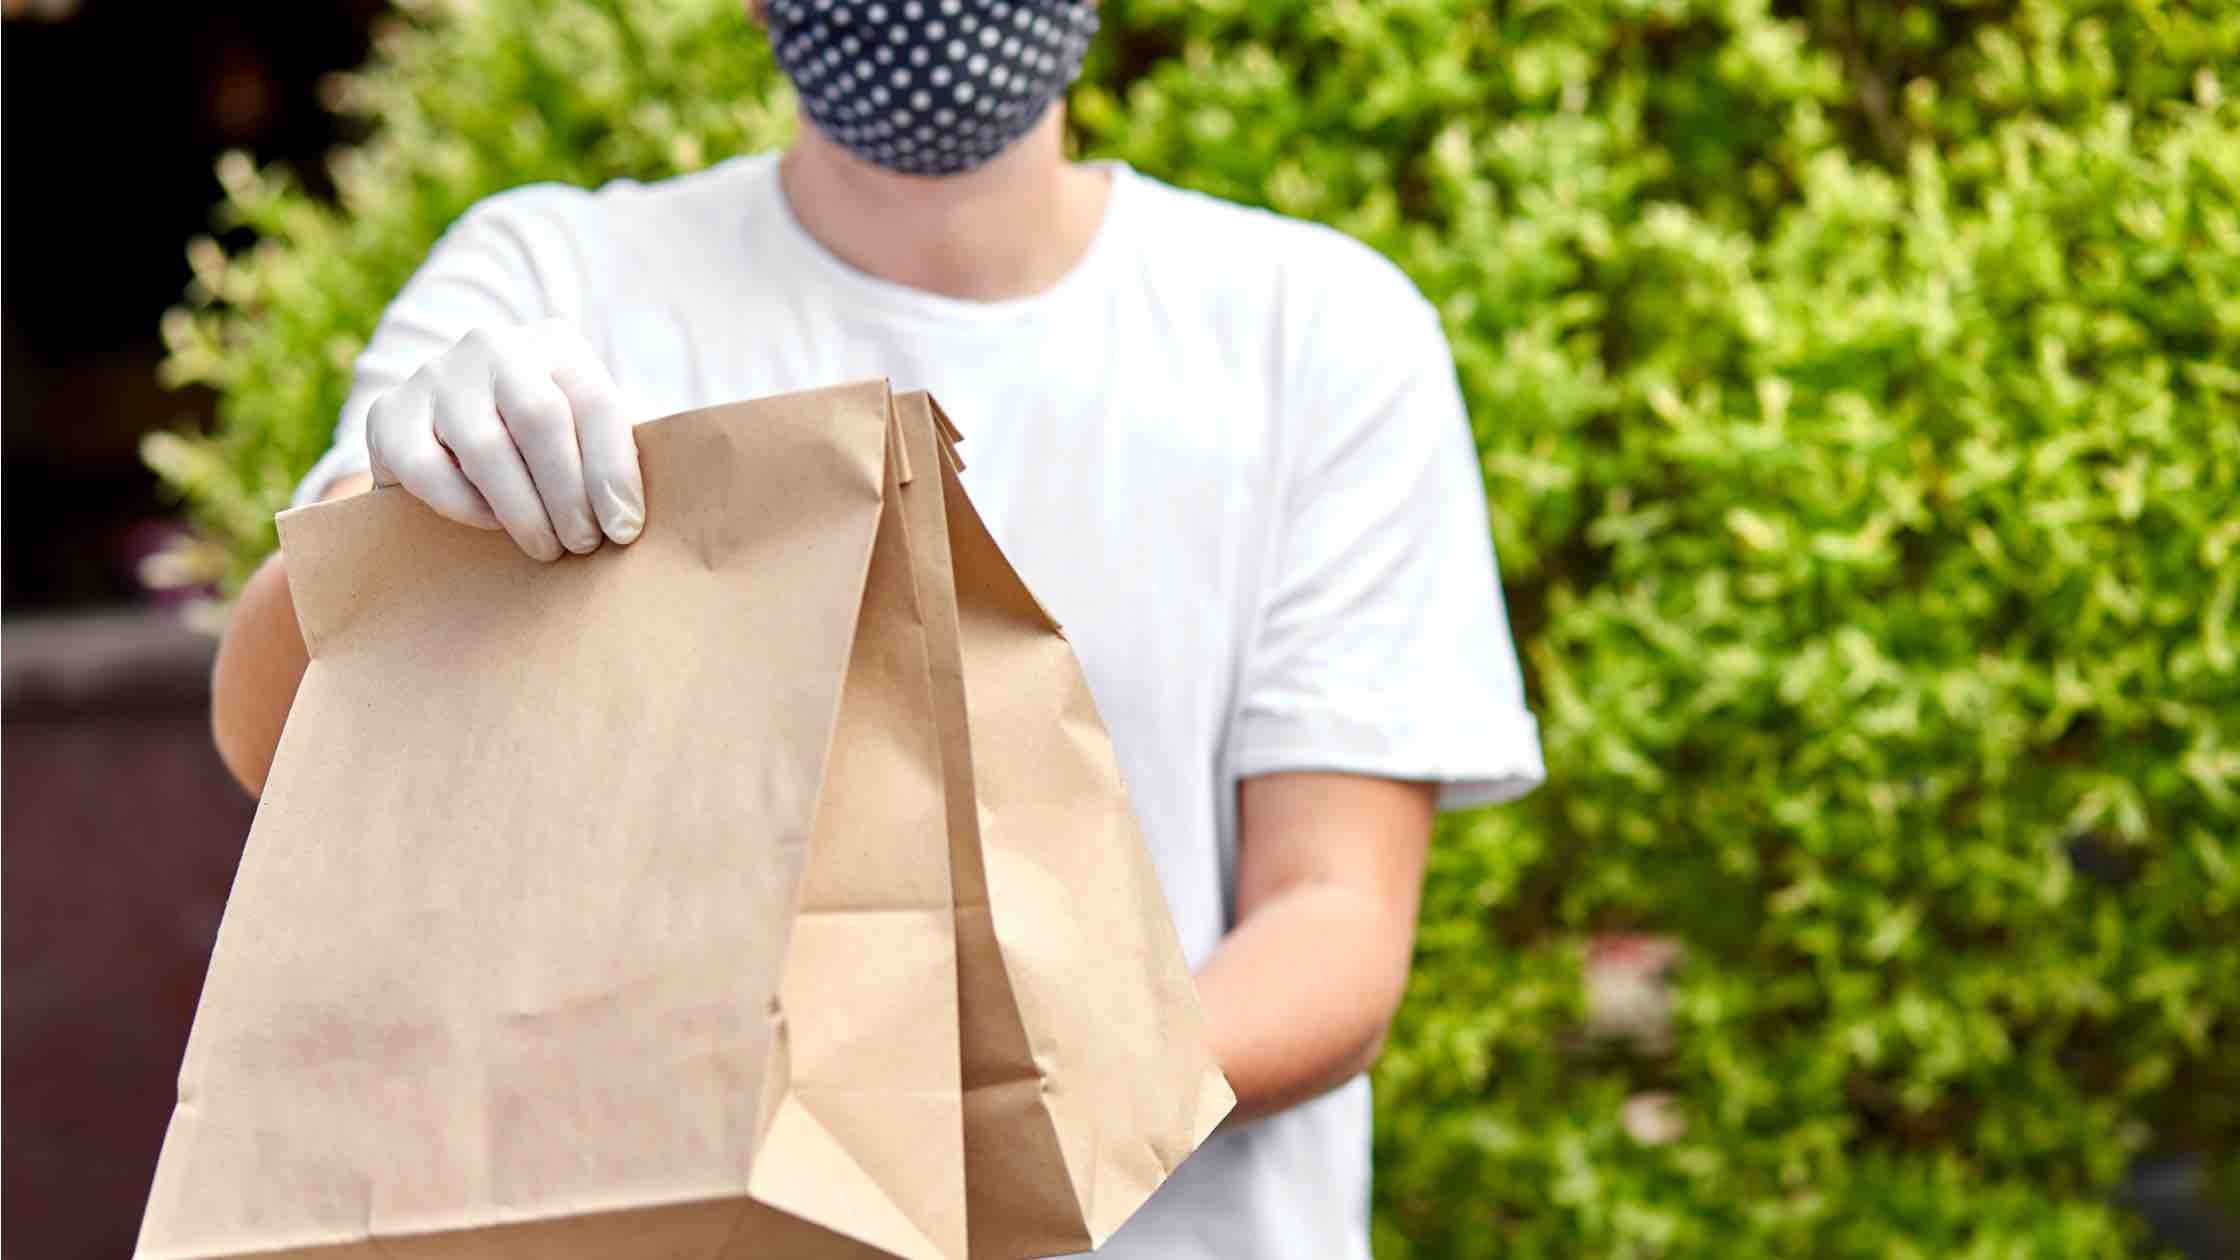 Restaurant courier holding food delivery